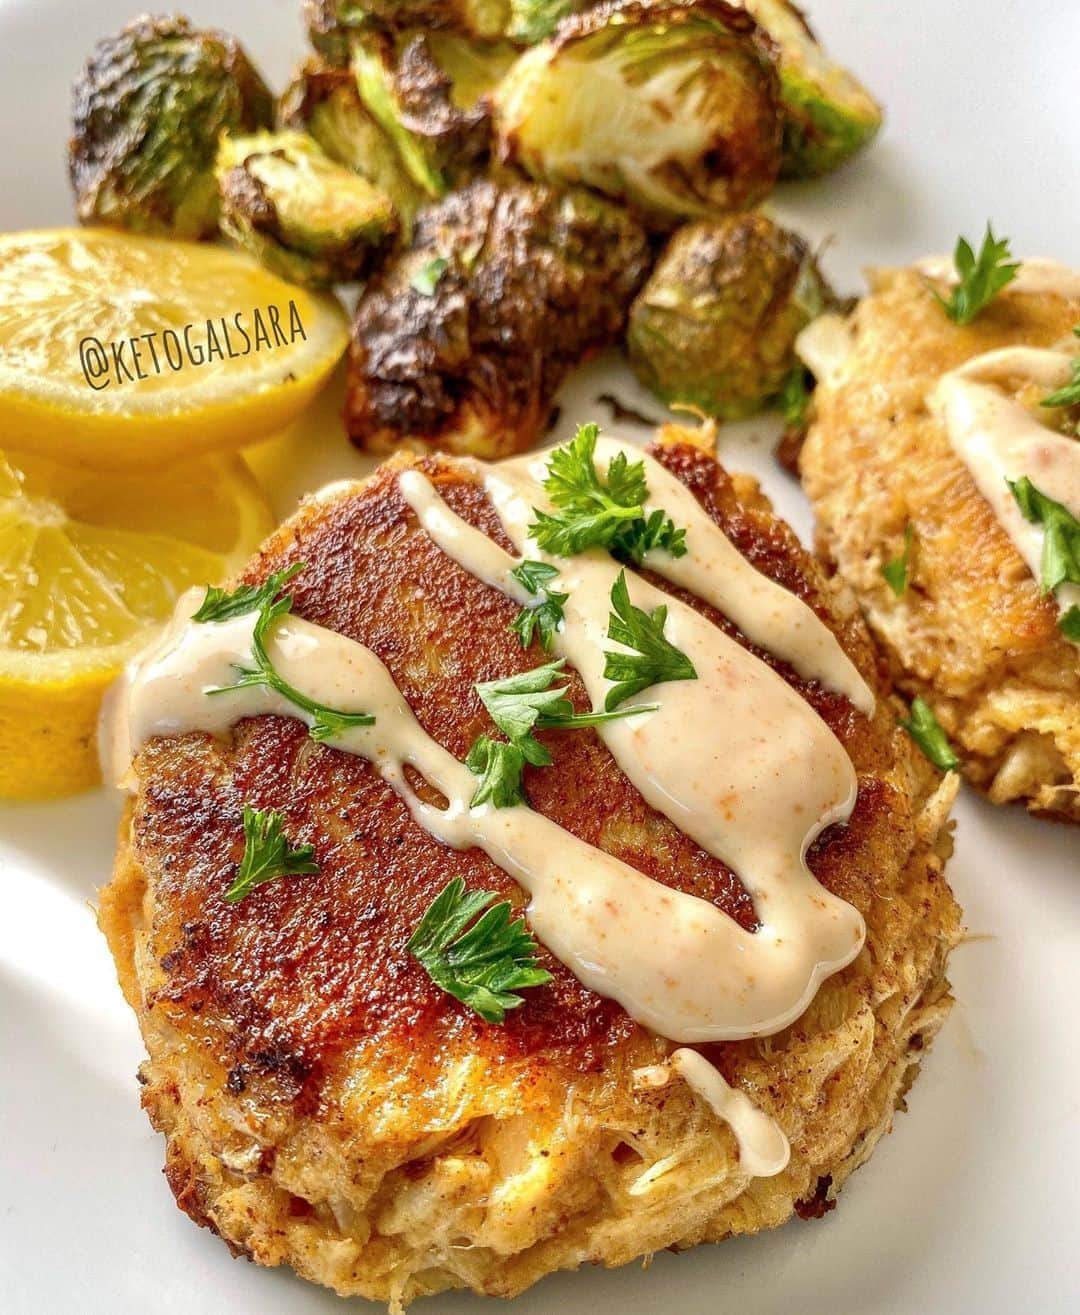 Flavorgod Seasoningsさんのインスタグラム写真 - (Flavorgod SeasoningsInstagram)「🦀Who likes crab cakes??? 🙋🏻‍♀️ Seasoned with FlavorGod Cajun Lovers Seasoning(Perfect for Fish)⁠ -⁠ Recipe by @ketogalsara⁠ -⁠ KETO friendly flavors available here ⬇️⁠ Click link in the bio -> @flavorgod⁠ www.flavorgod.com⁠ -⁠ Low carb crab cakes:⁠ 🦀 8 Oz premium lump crab⁠ 🦀 1 tbs Mayo⁠ 🦀1/2 cup @porkkinggood unseasoned pork crumbs⁠ 🦀 1 tsp Worcestershire sauce⁠ 🦀1 tsp Lemon juice⁠ 🦀1/2 tsp Cajun lovers seasoning⁠ 🦀1 large egg⁠ 🦀1 tbs spicy brown mustard⁠ .⁠ .⁠ 🦀Combine all the above ingredients.⁠ 🦀Form 4 crab cakes⁠ 🦀pan fry in a hot cast iron skillet with butter for about 4 minutes on each side depending on how thick you made them.⁠ .⁠ 🦀Top with fresh chopped parsley and a homemade Cajun remoulade sauce. I made this to taste. (Mayo, hot sauce, Cajun seasoning, lemon juice and horseradish)⁠ -⁠ Flavor God Seasonings are:⁠ ✅ZERO CALORIES PER SERVING⁠ ✅MADE FRESH⁠ ✅MADE LOCALLY IN US⁠ ✅FREE GIFTS AT CHECKOUT⁠ ✅GLUTEN FREE⁠ ✅#PALEO & #KETO FRIENDLY⁠ -⁠ #food #foodie #flavorgod #seasonings #glutenfree #mealprep #seasonings #breakfast #lunch #dinner #yummy #delicious #foodporn」9月29日 10時01分 - flavorgod